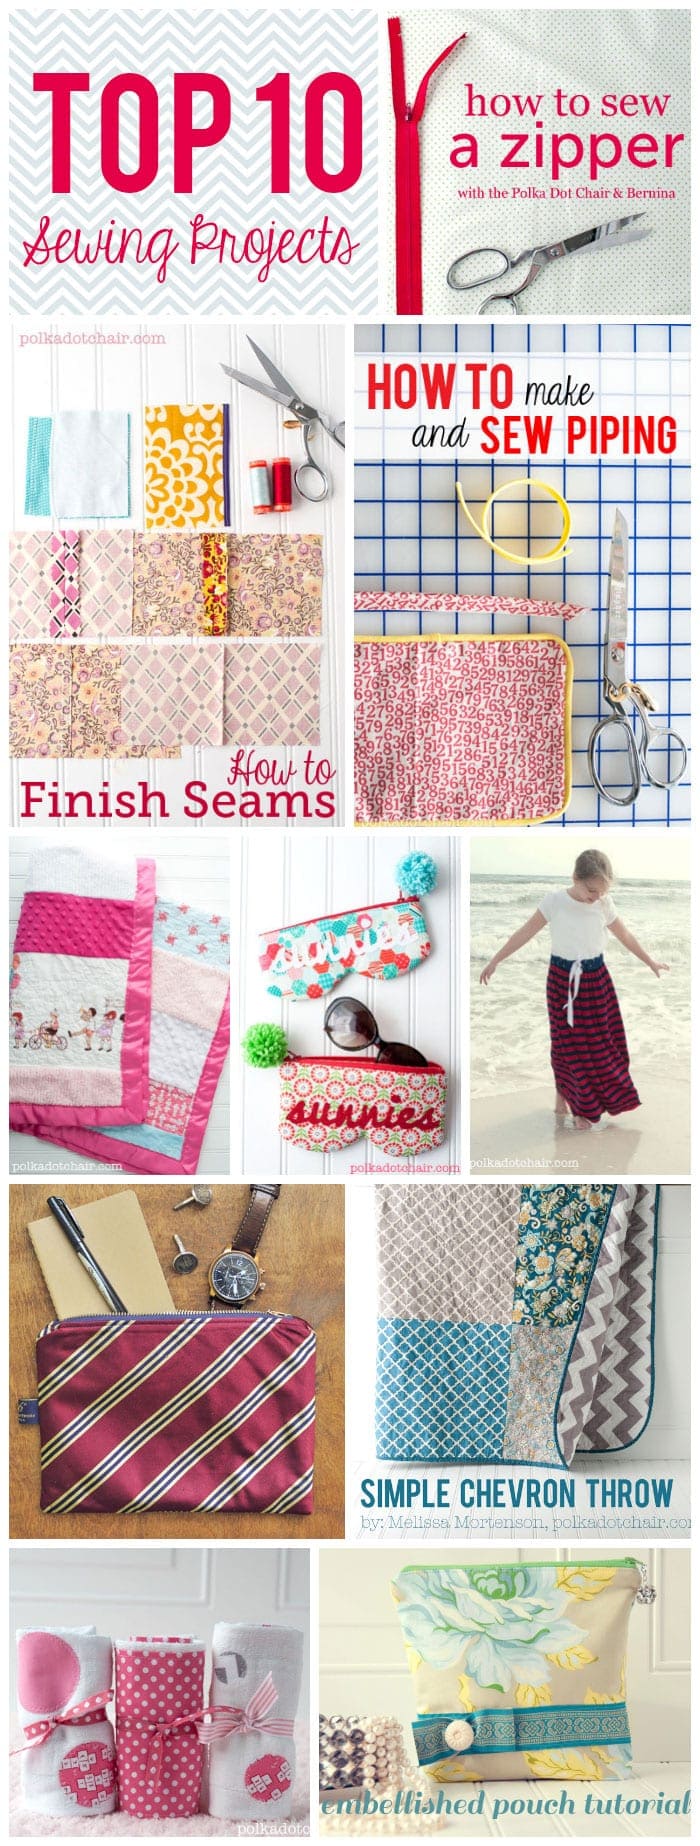 Top 10 Sewing Projects of 2013